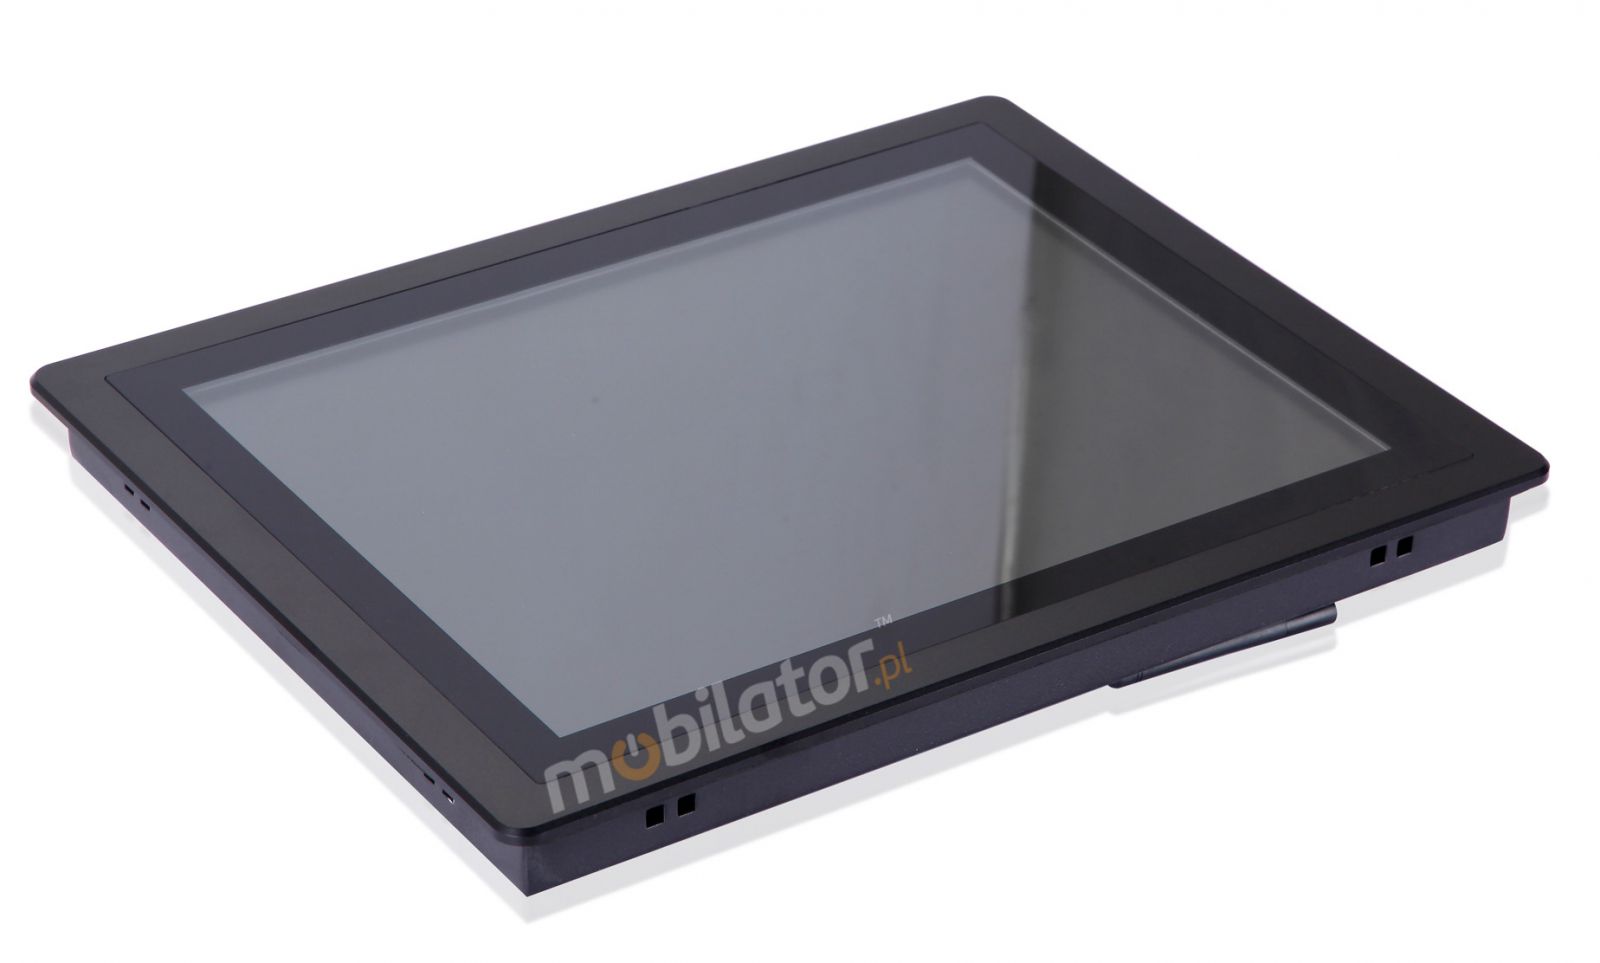 Mobilator CTPC150RD3 Flat Design PCAP Fanless Touch PC, LED panel, 10 points touch screen, built-in WIFI, 12V DC input